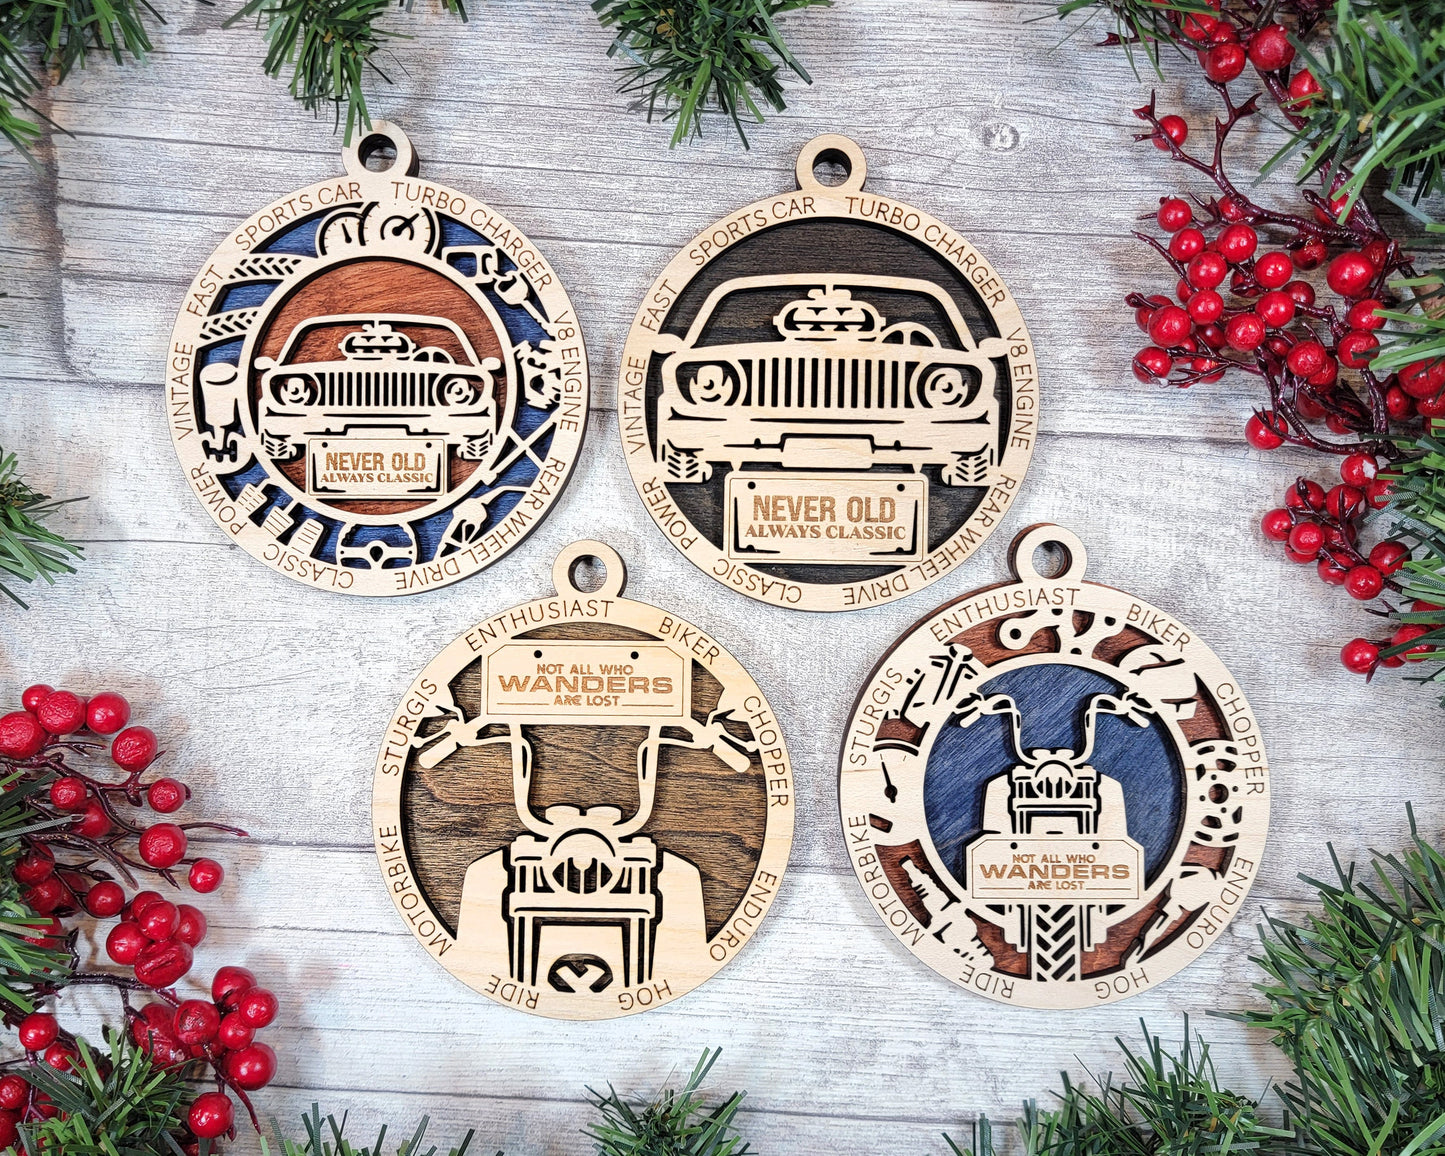 Jolly Good Time Ornaments - 26 Unique designs - SVG, PDF, AI File Download - Sized for Glowforge